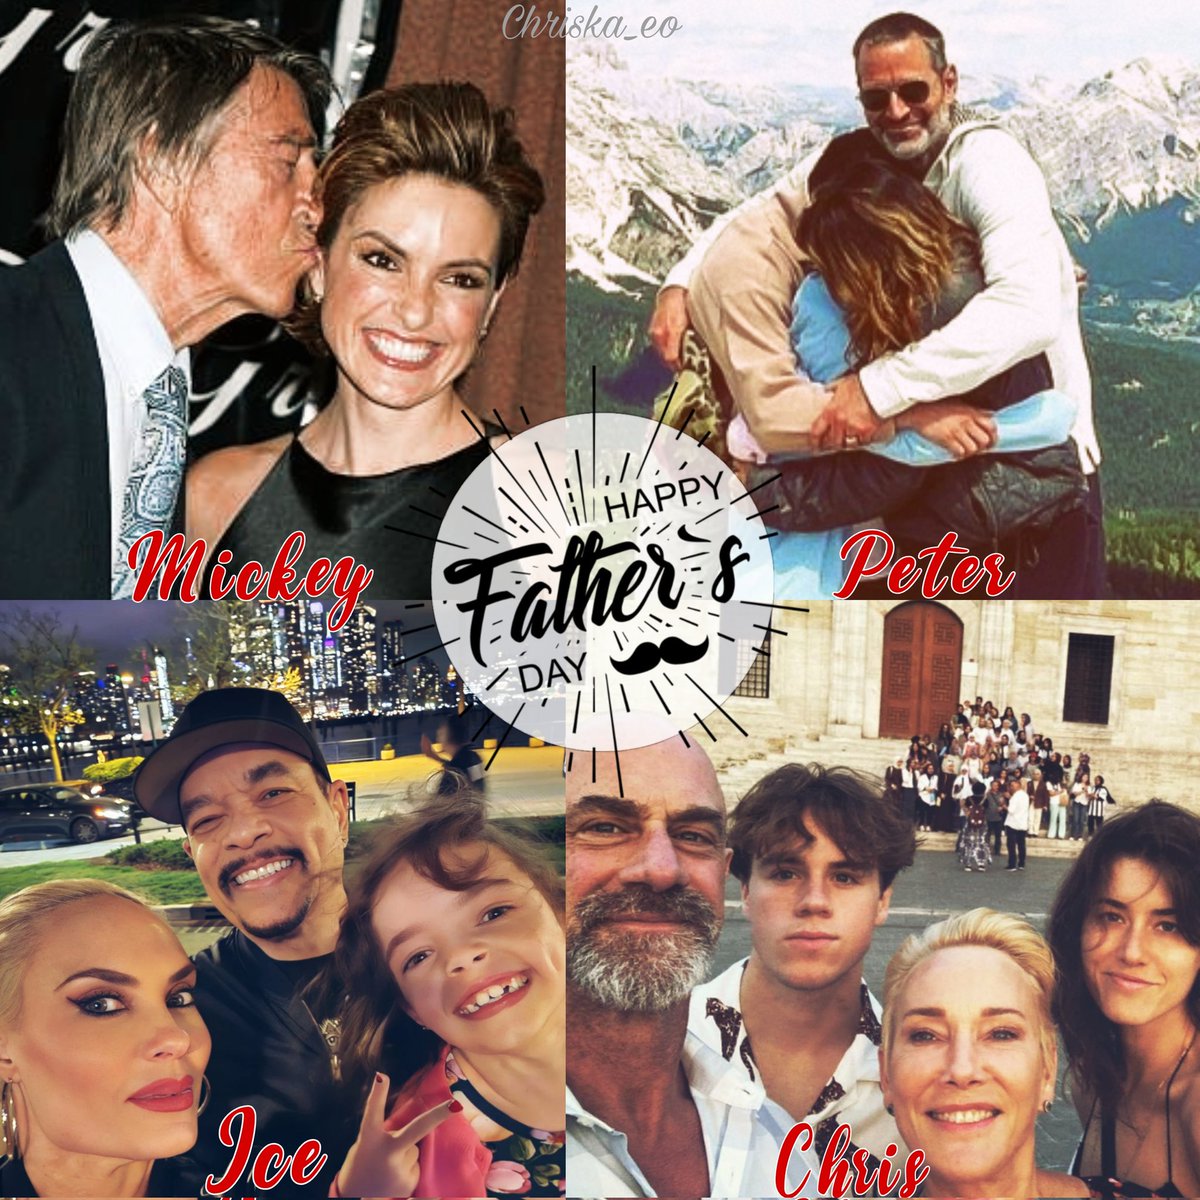 These MEN are special and the greatest example for this world...keep them in your heart 💖 #HappyFathersDay 🎊 
#mariskahargitay #peterhermann #mickeyhargitay #chrismeloni #familygoals #familytime #loveisreal